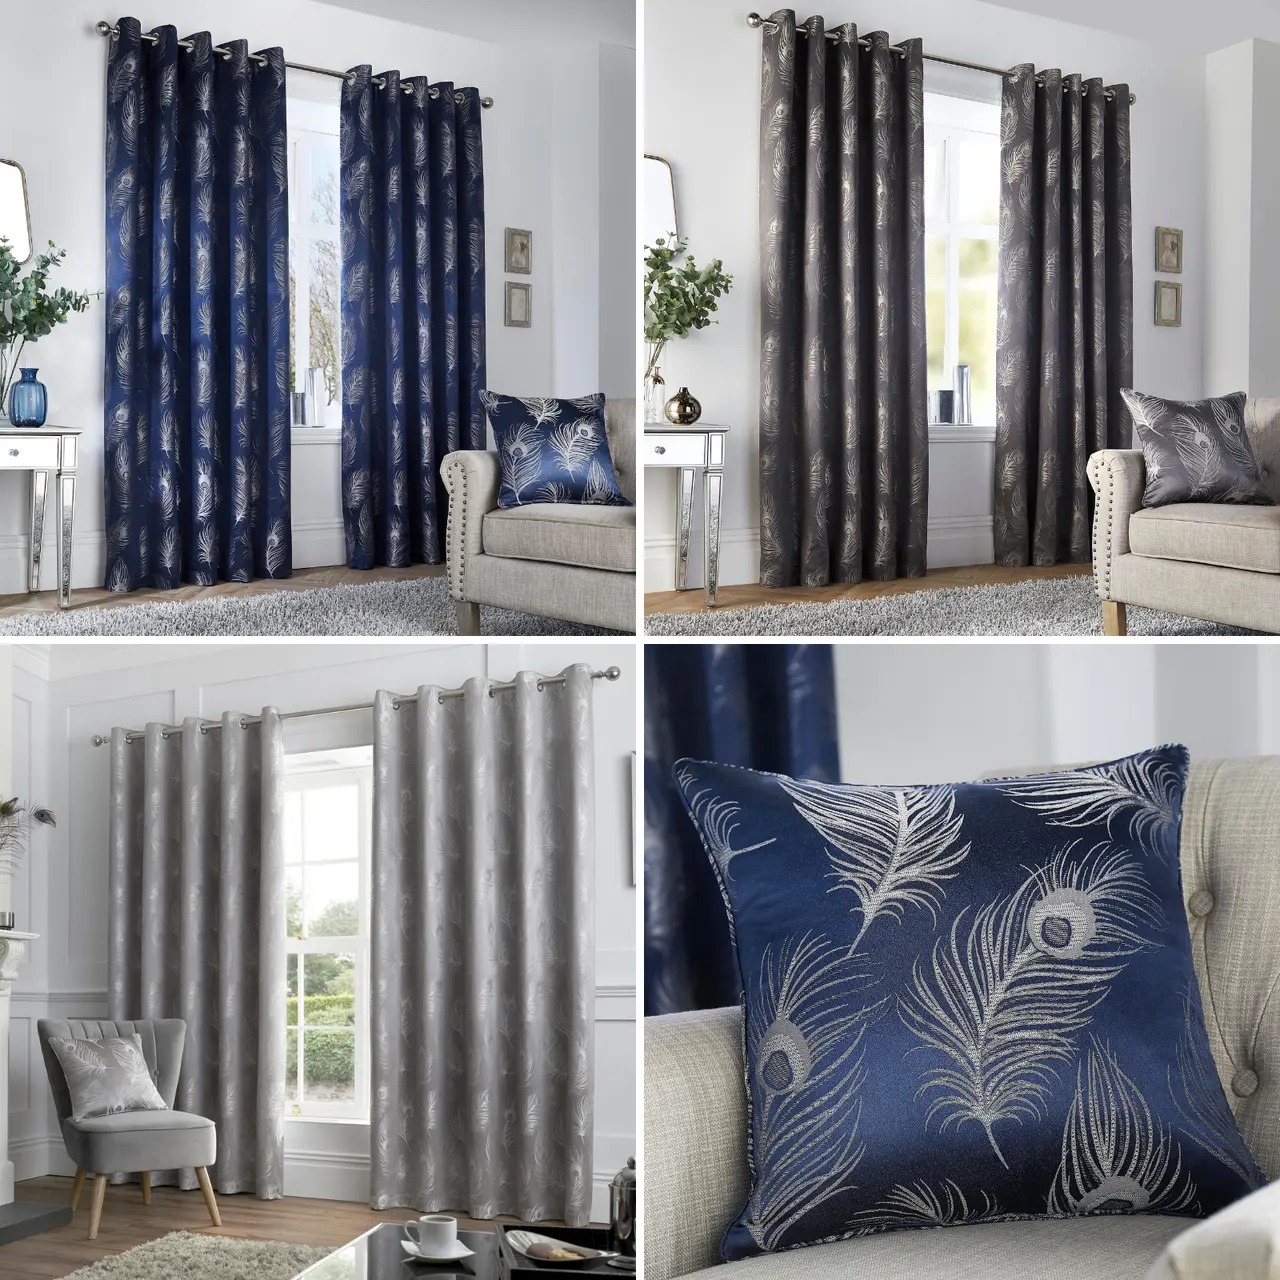 Cheap embroidery jacquard sheer embroidered rope embroidery Curtains For The Living Room, Luxury Curtain For Kitchen Window/